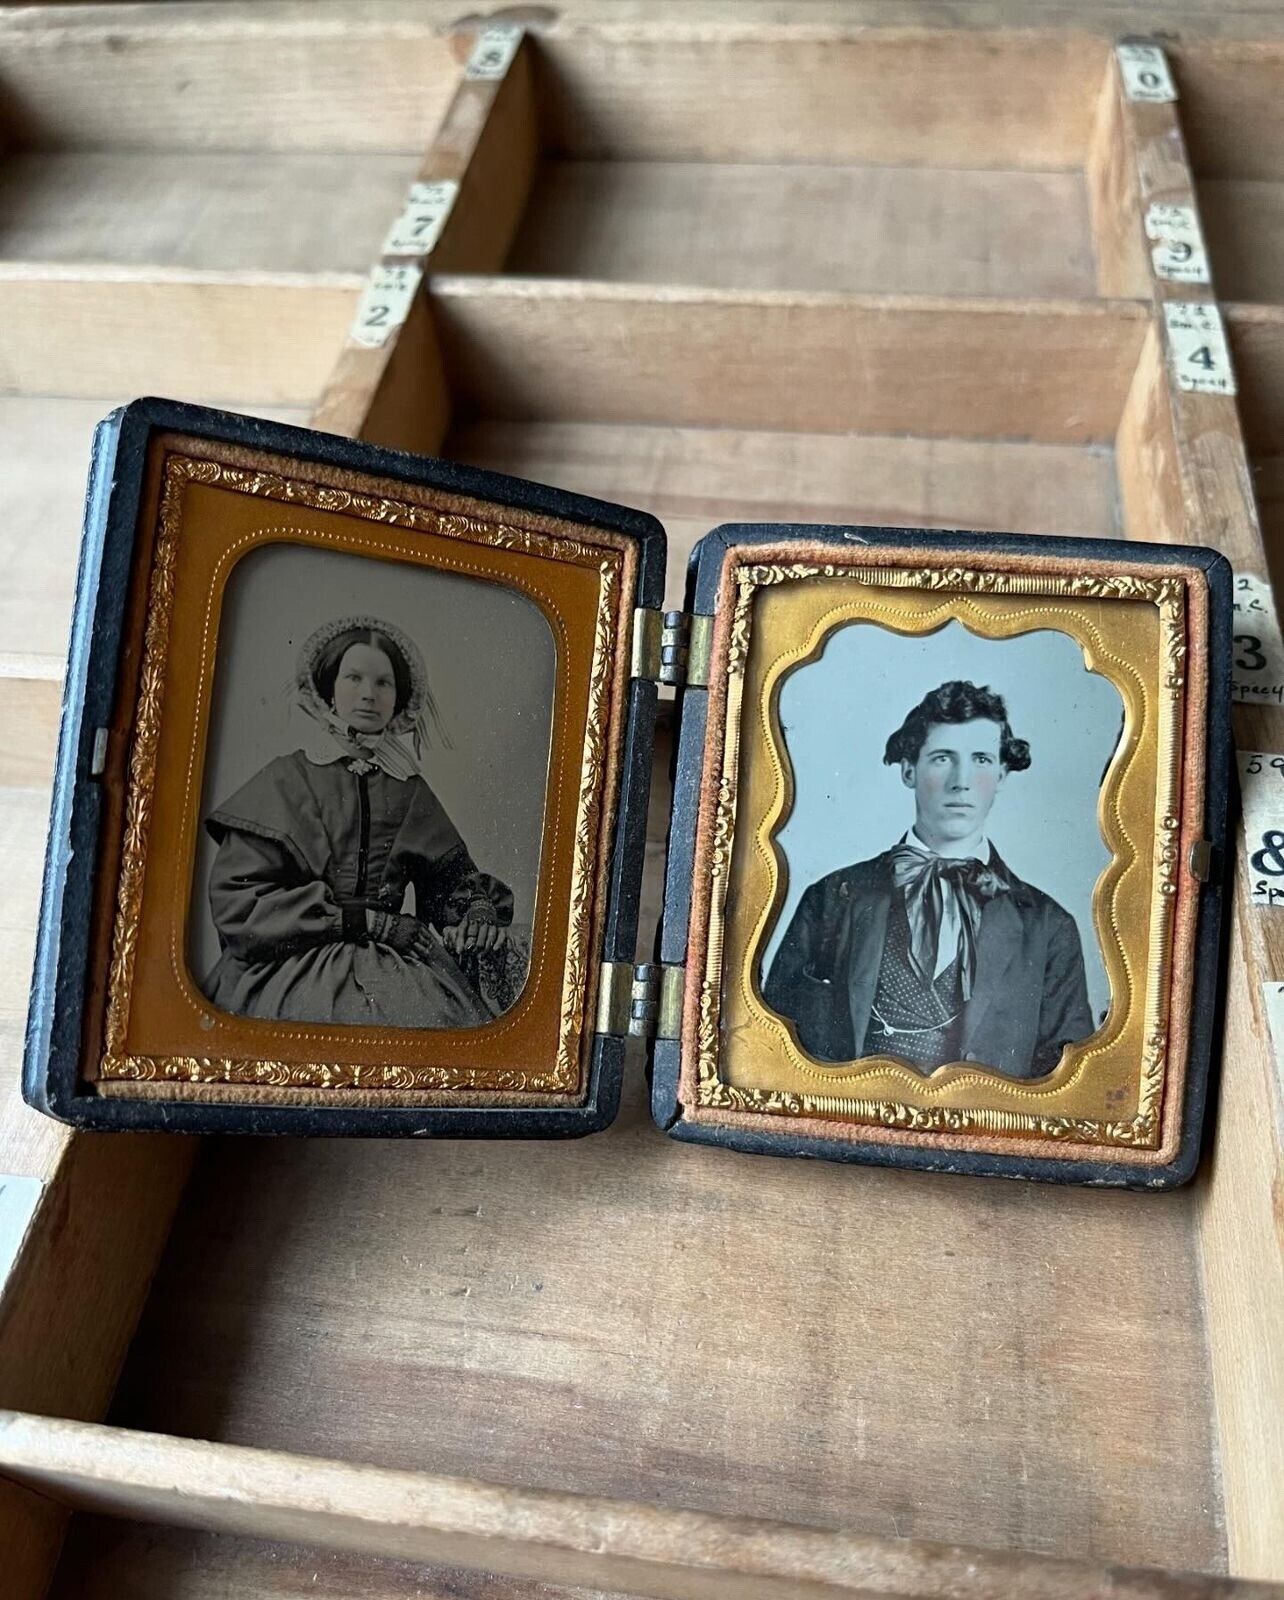 Antique ambrotype photos inside thermoplastic union case